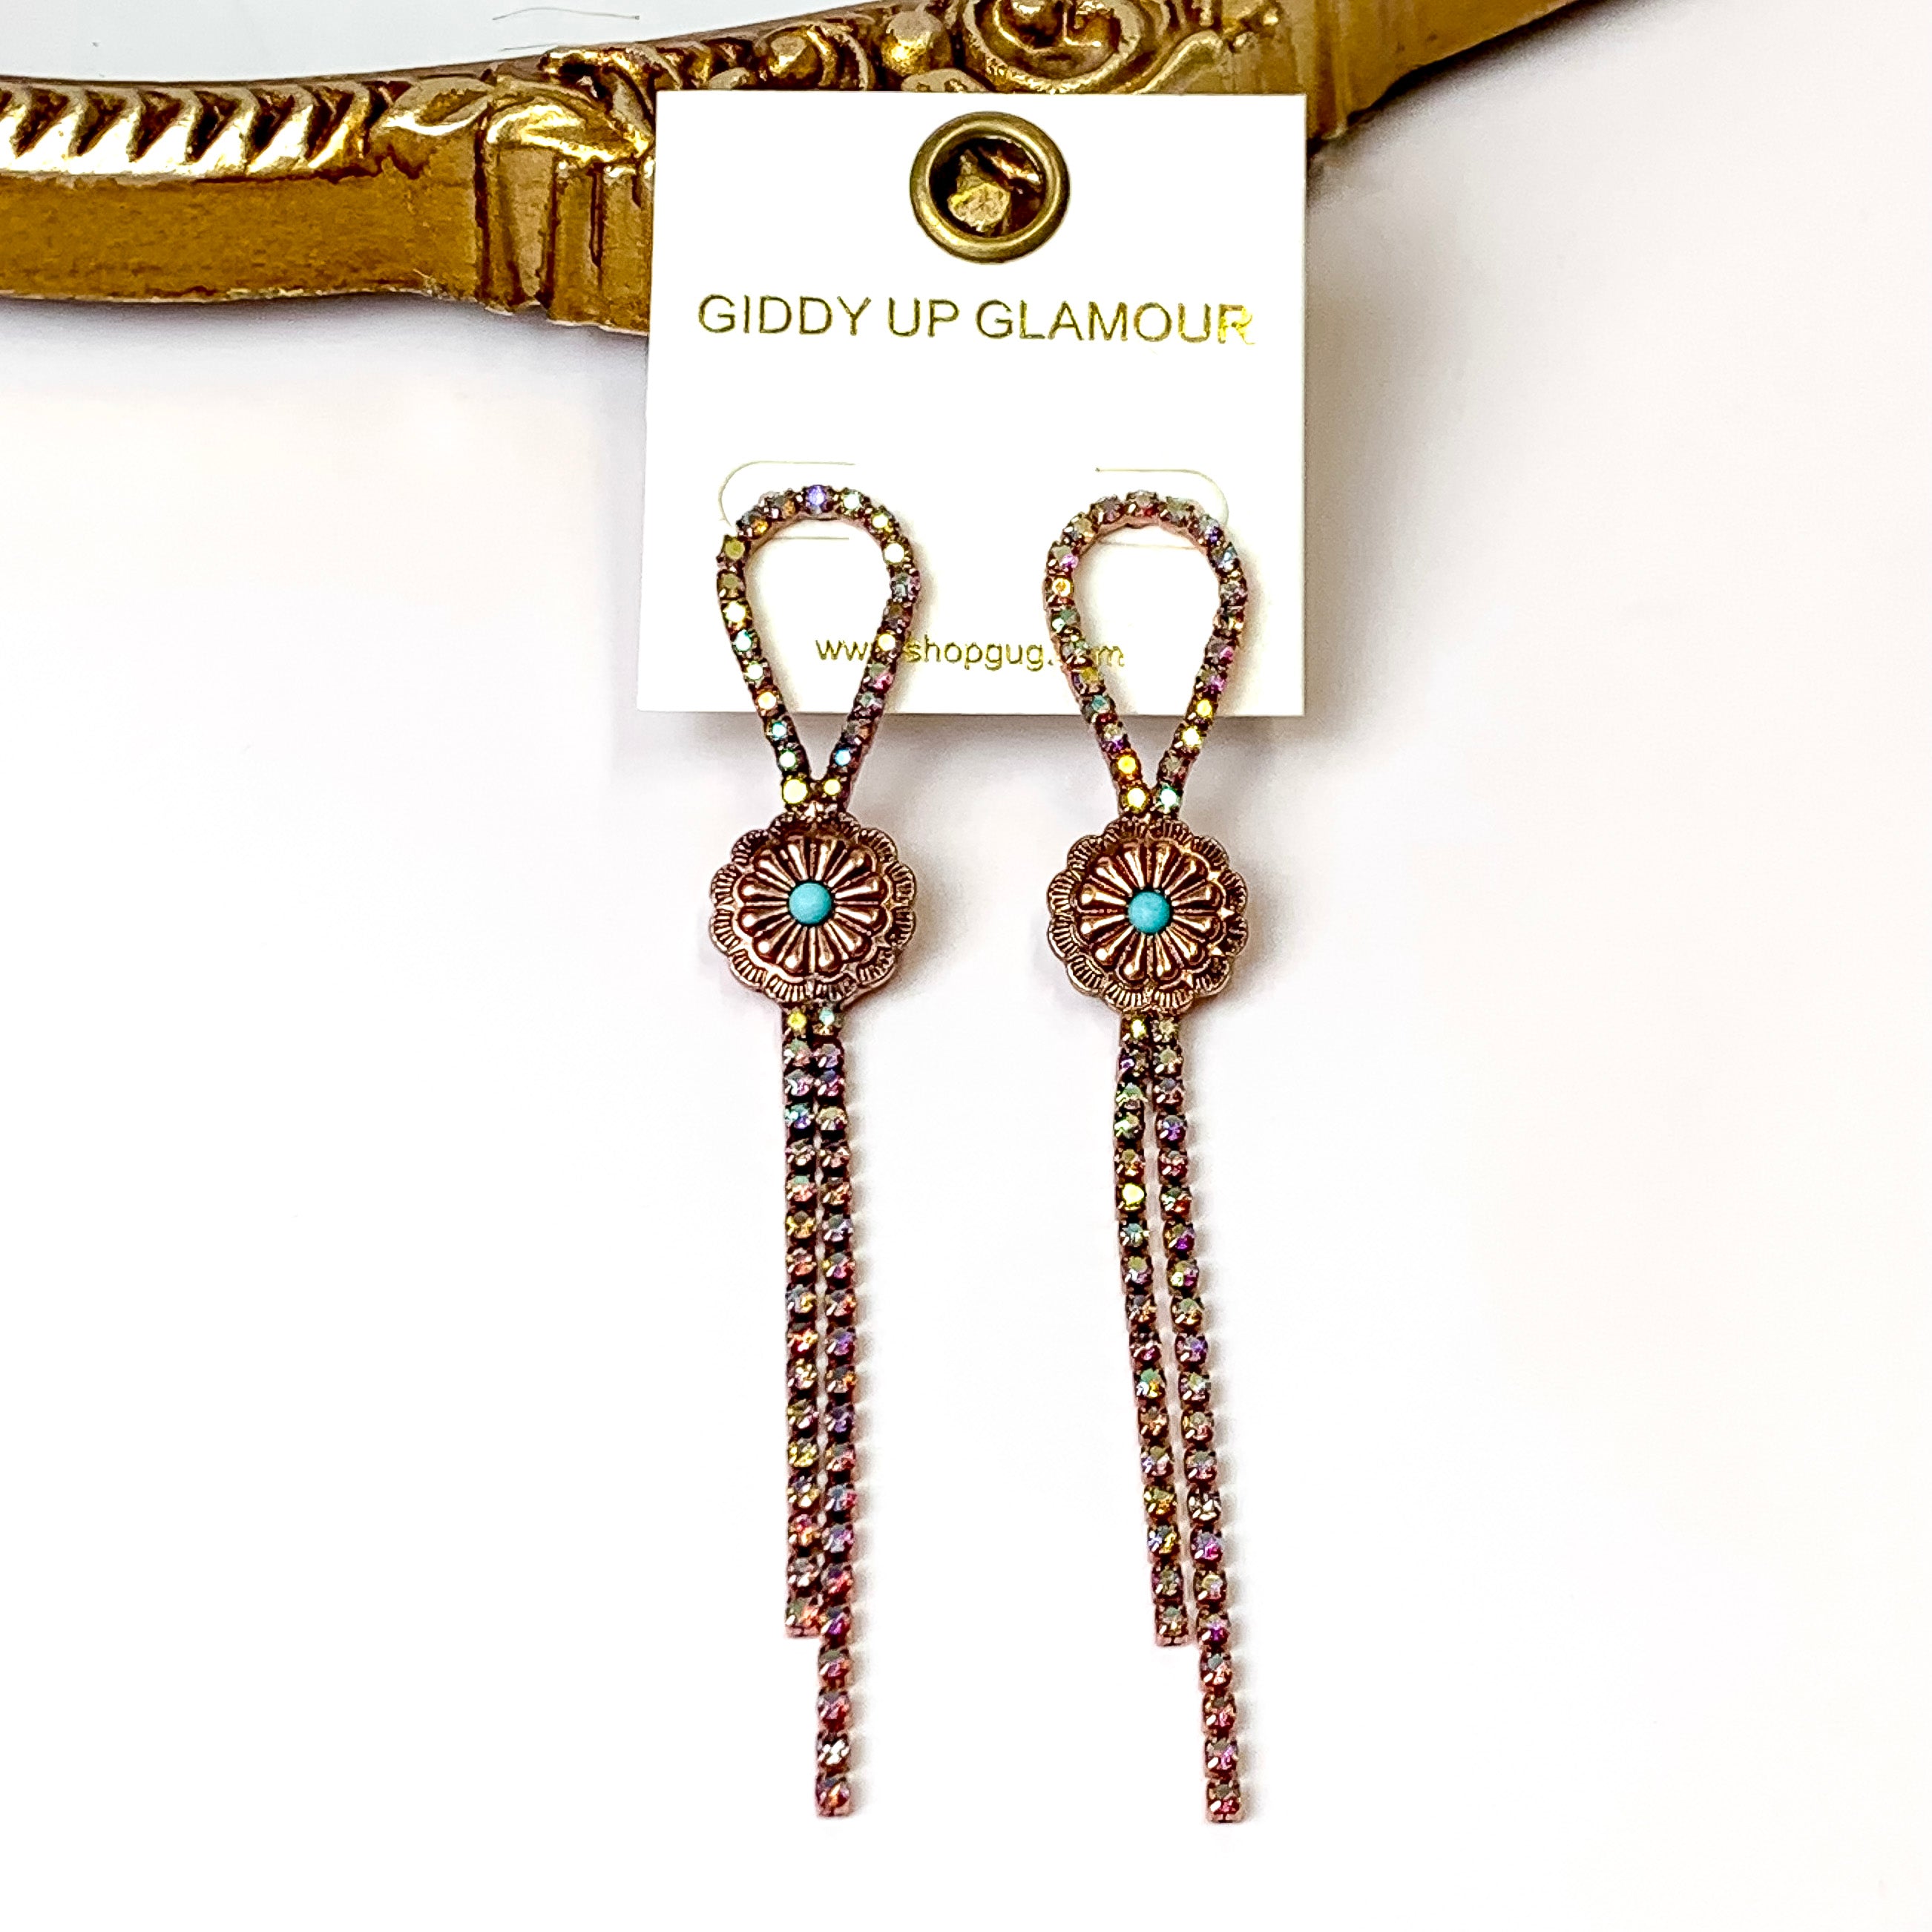 AB Crystal Bolo Tie Tassel Earrings with Circle Concho in Copper Tone - Giddy Up Glamour Boutique